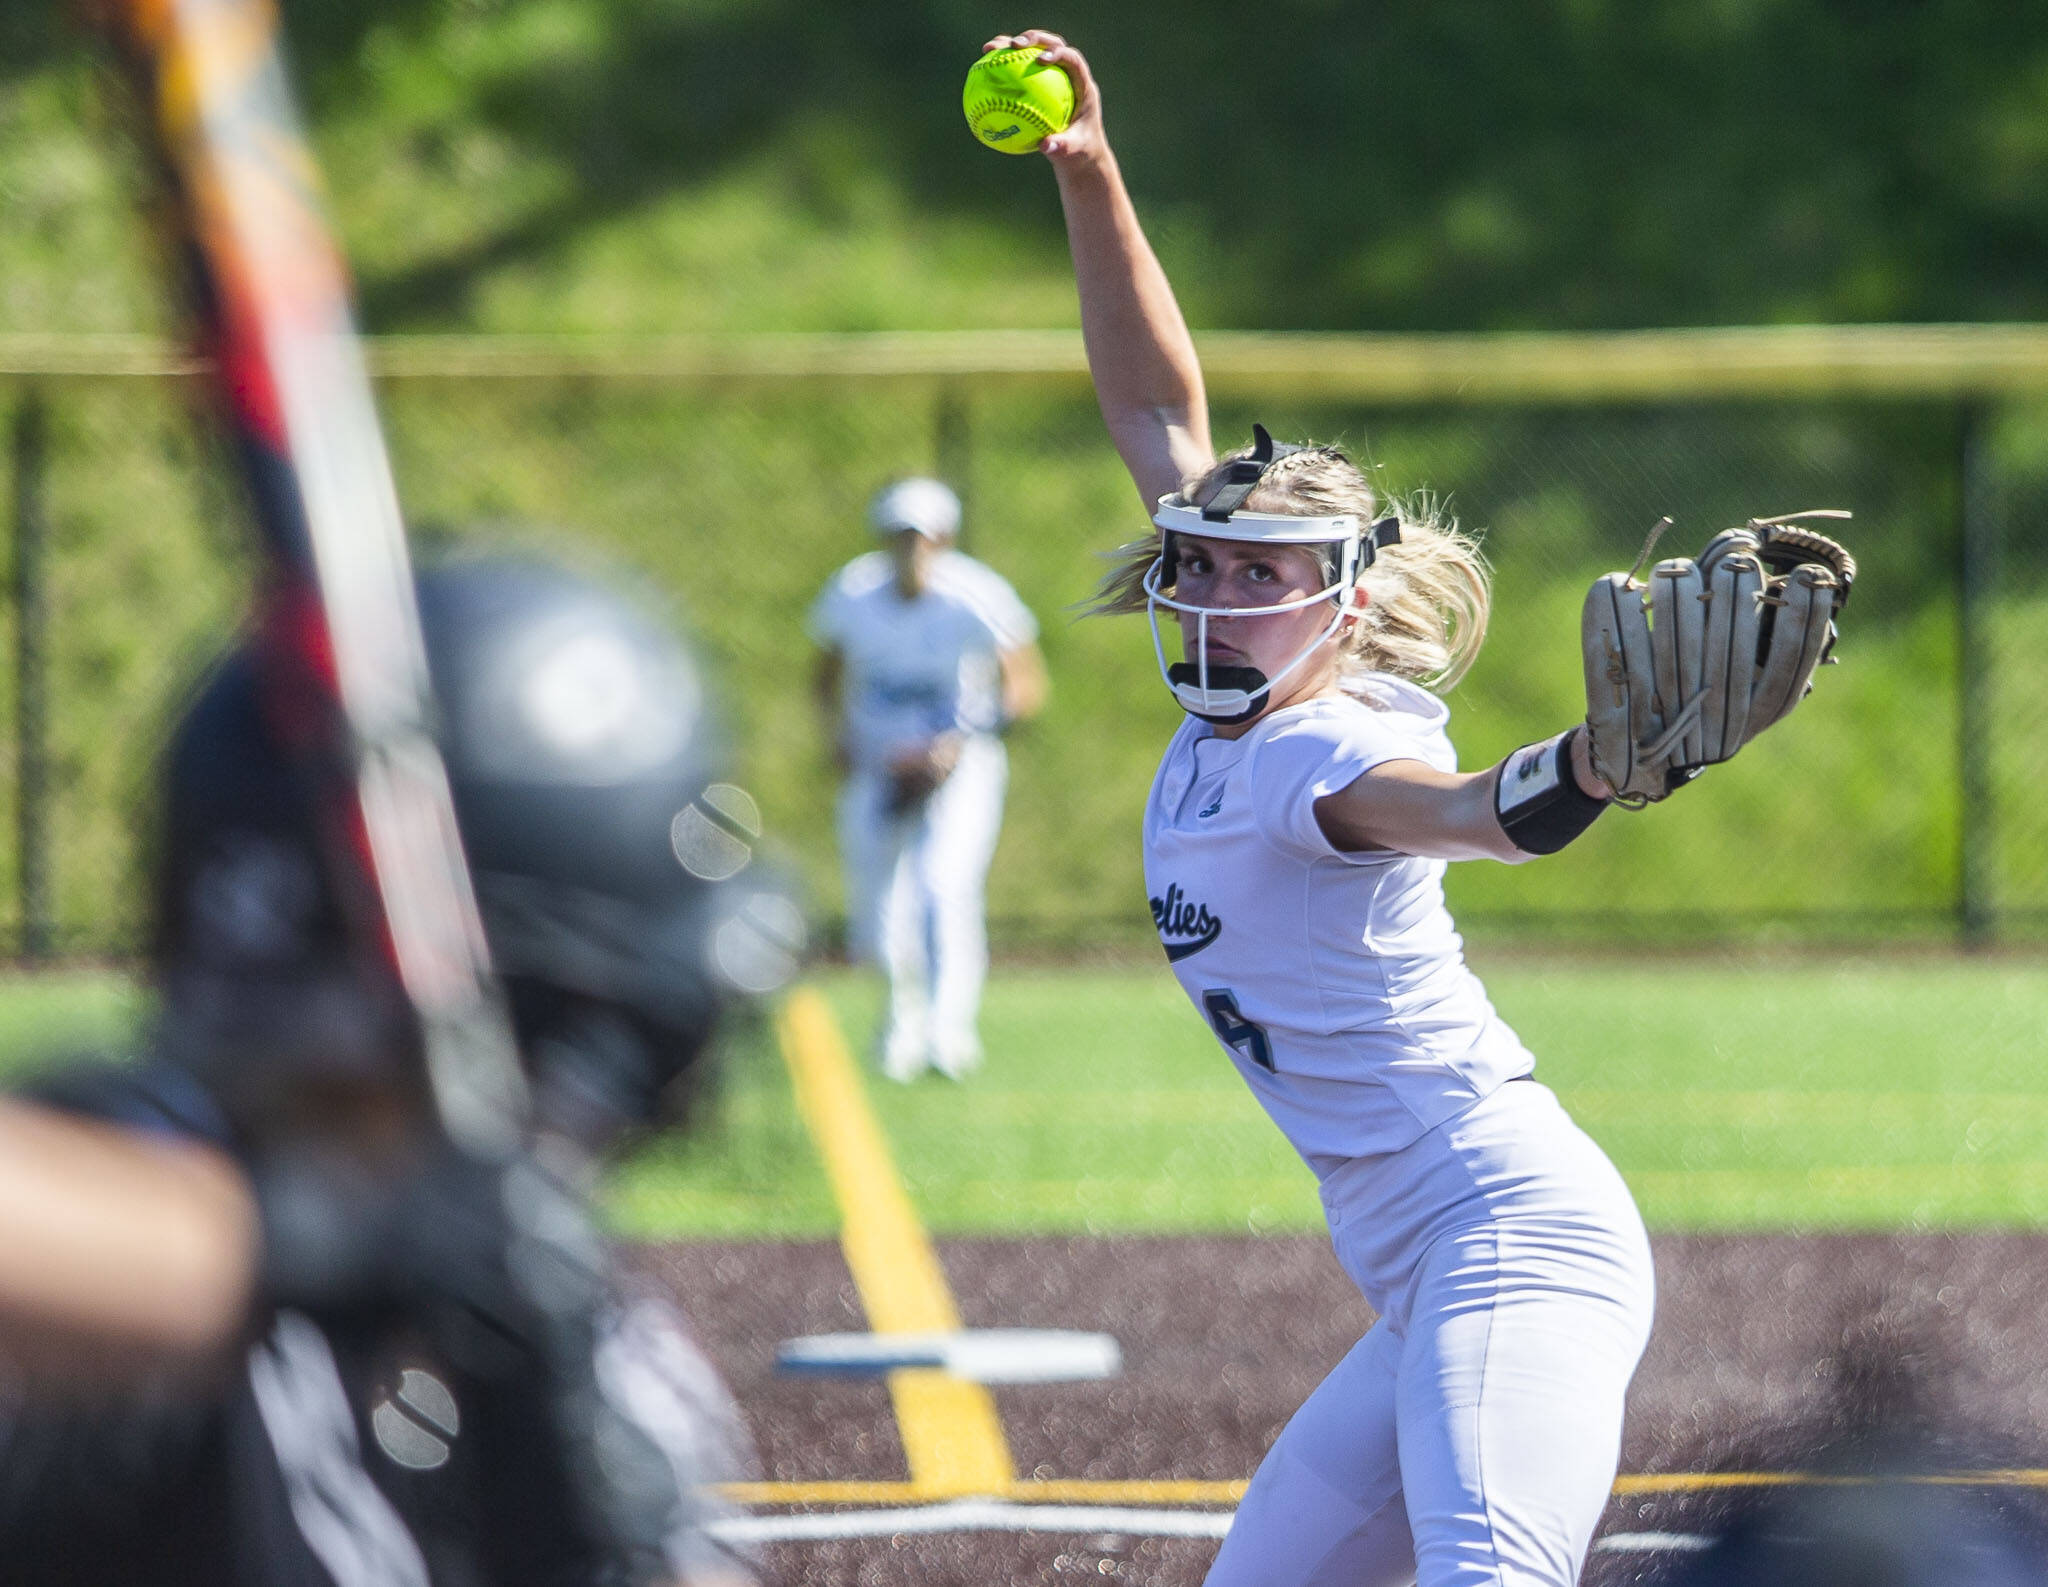 Glaicer Peak’s Faith Jordan pitches during the game against Eastlake on Friday, May 19, 2023 in Everett, Washington. (Olivia Vanni / The Herald)